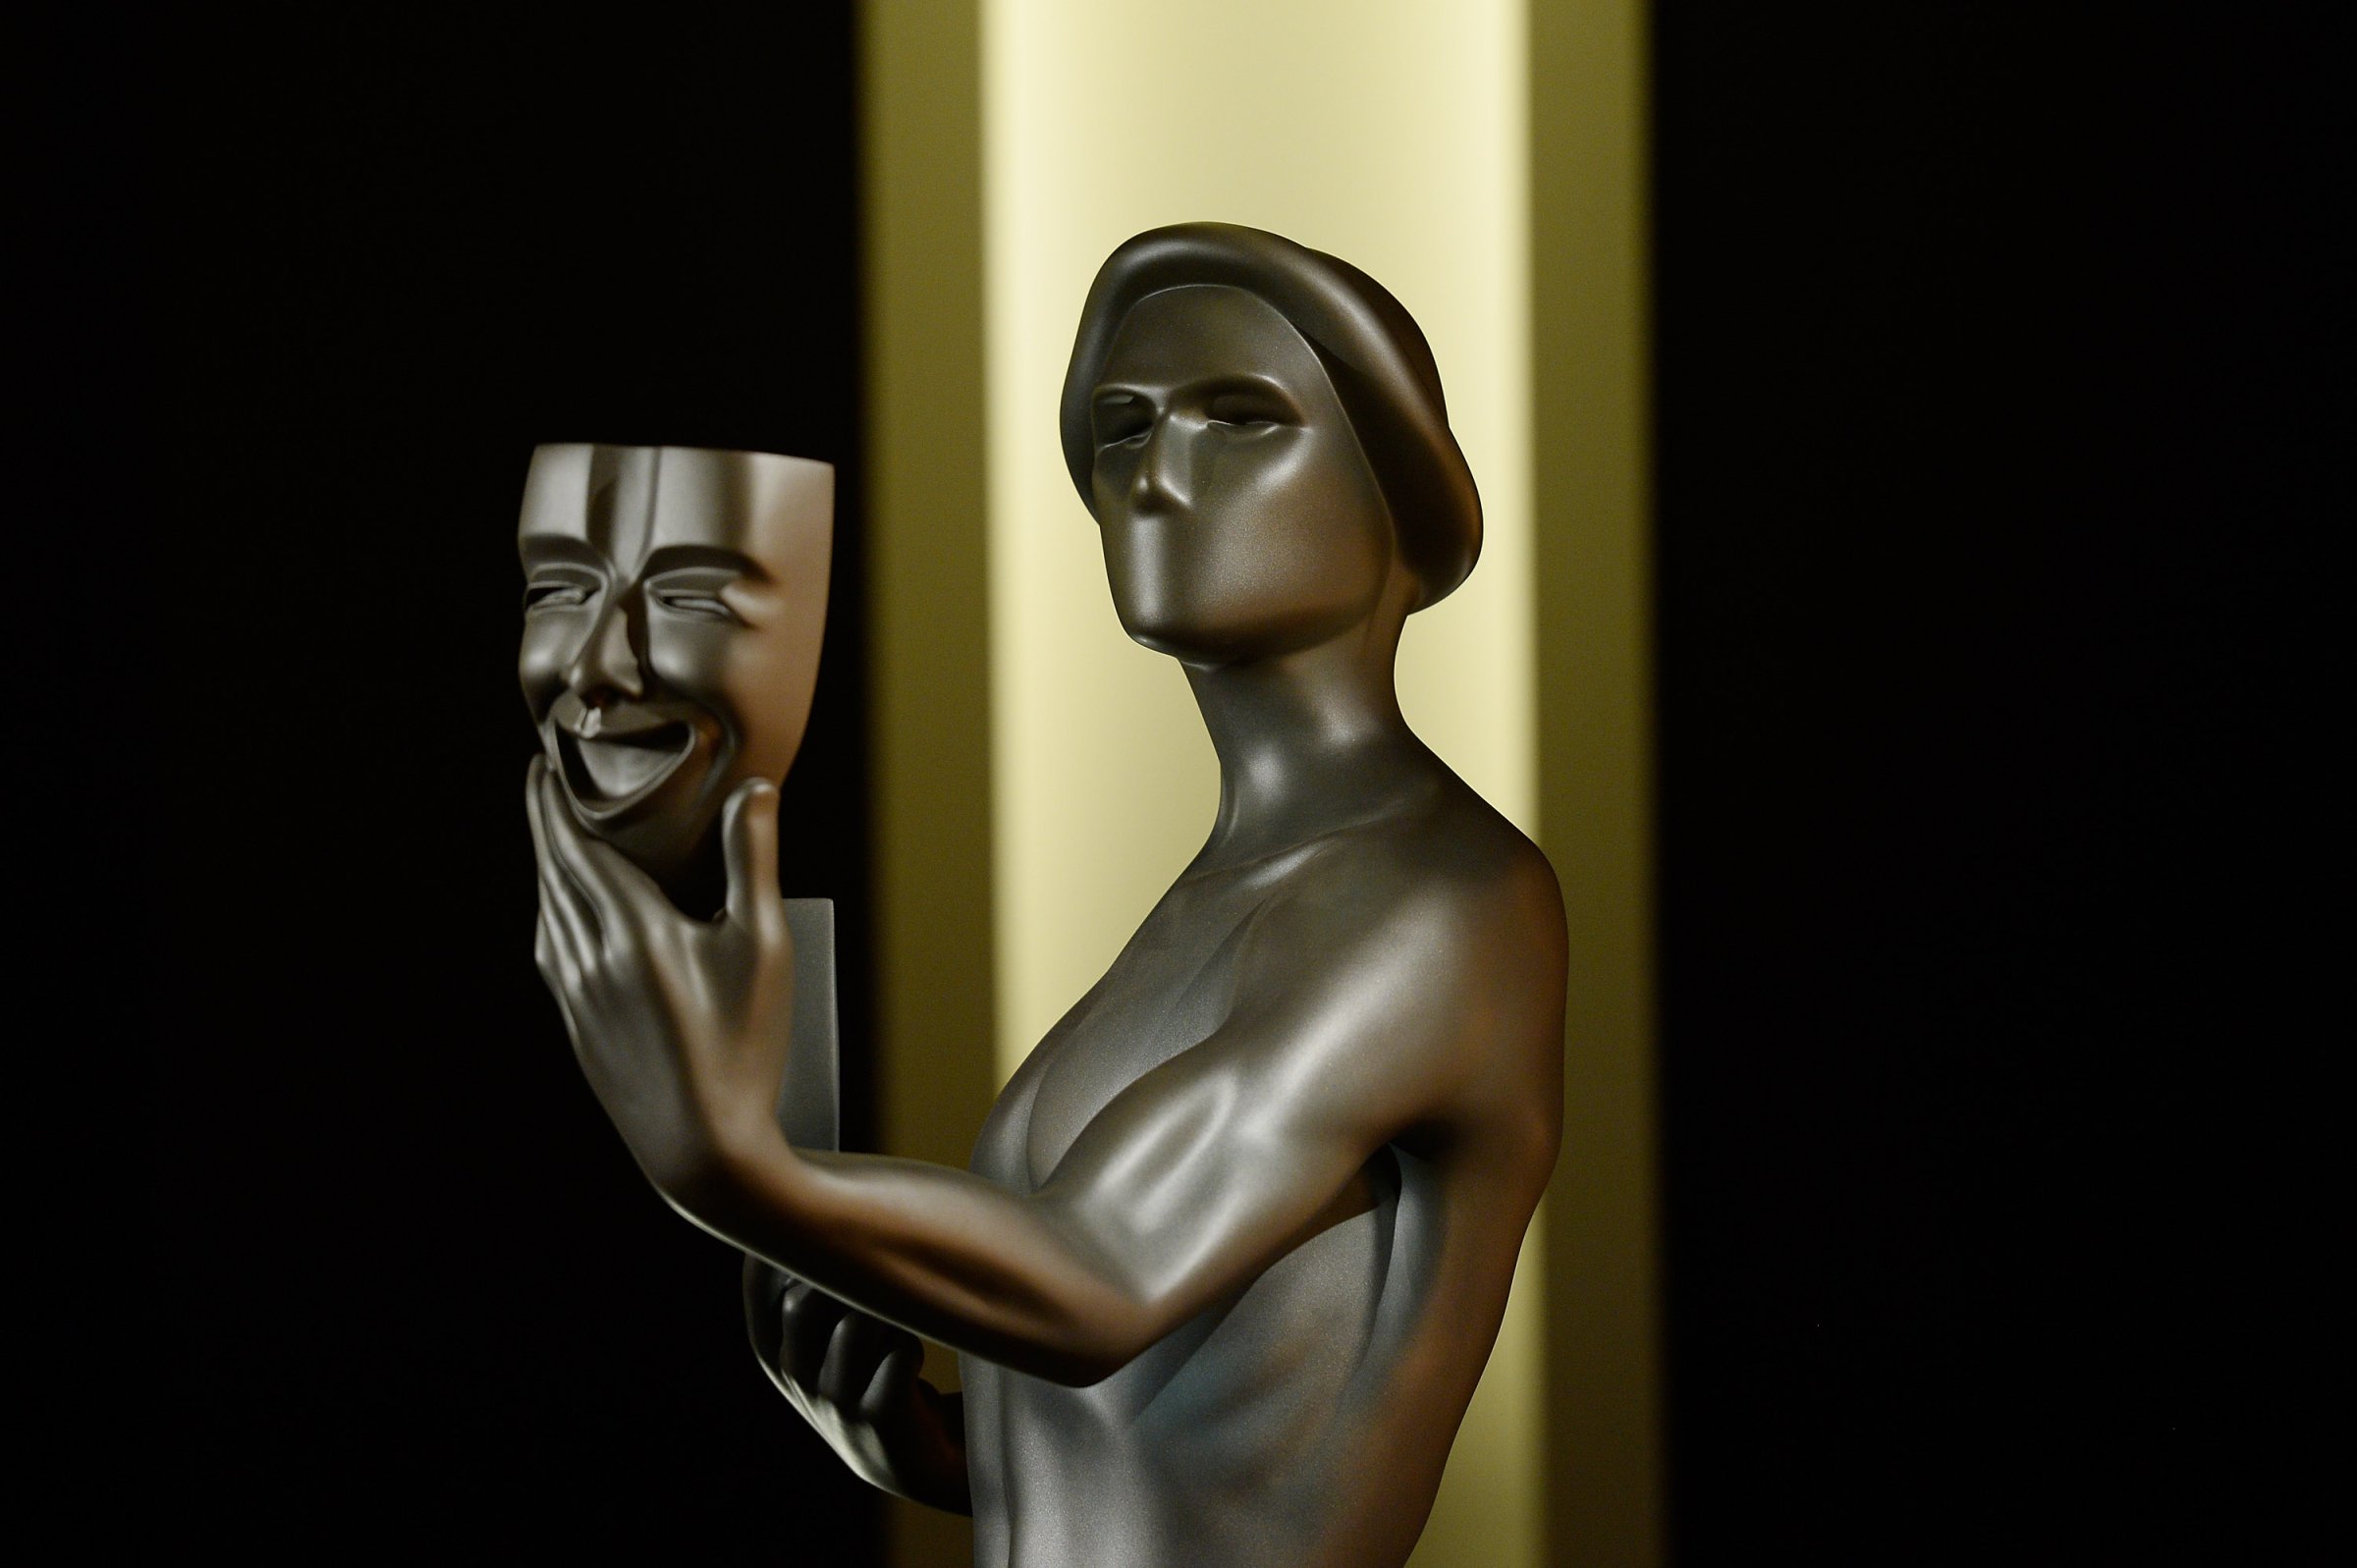 The actor statue is seen during the 23rd annual SAG Awards nominations announcement at Pacific Design Center on December 14, 2016 in West Hollywood, California.